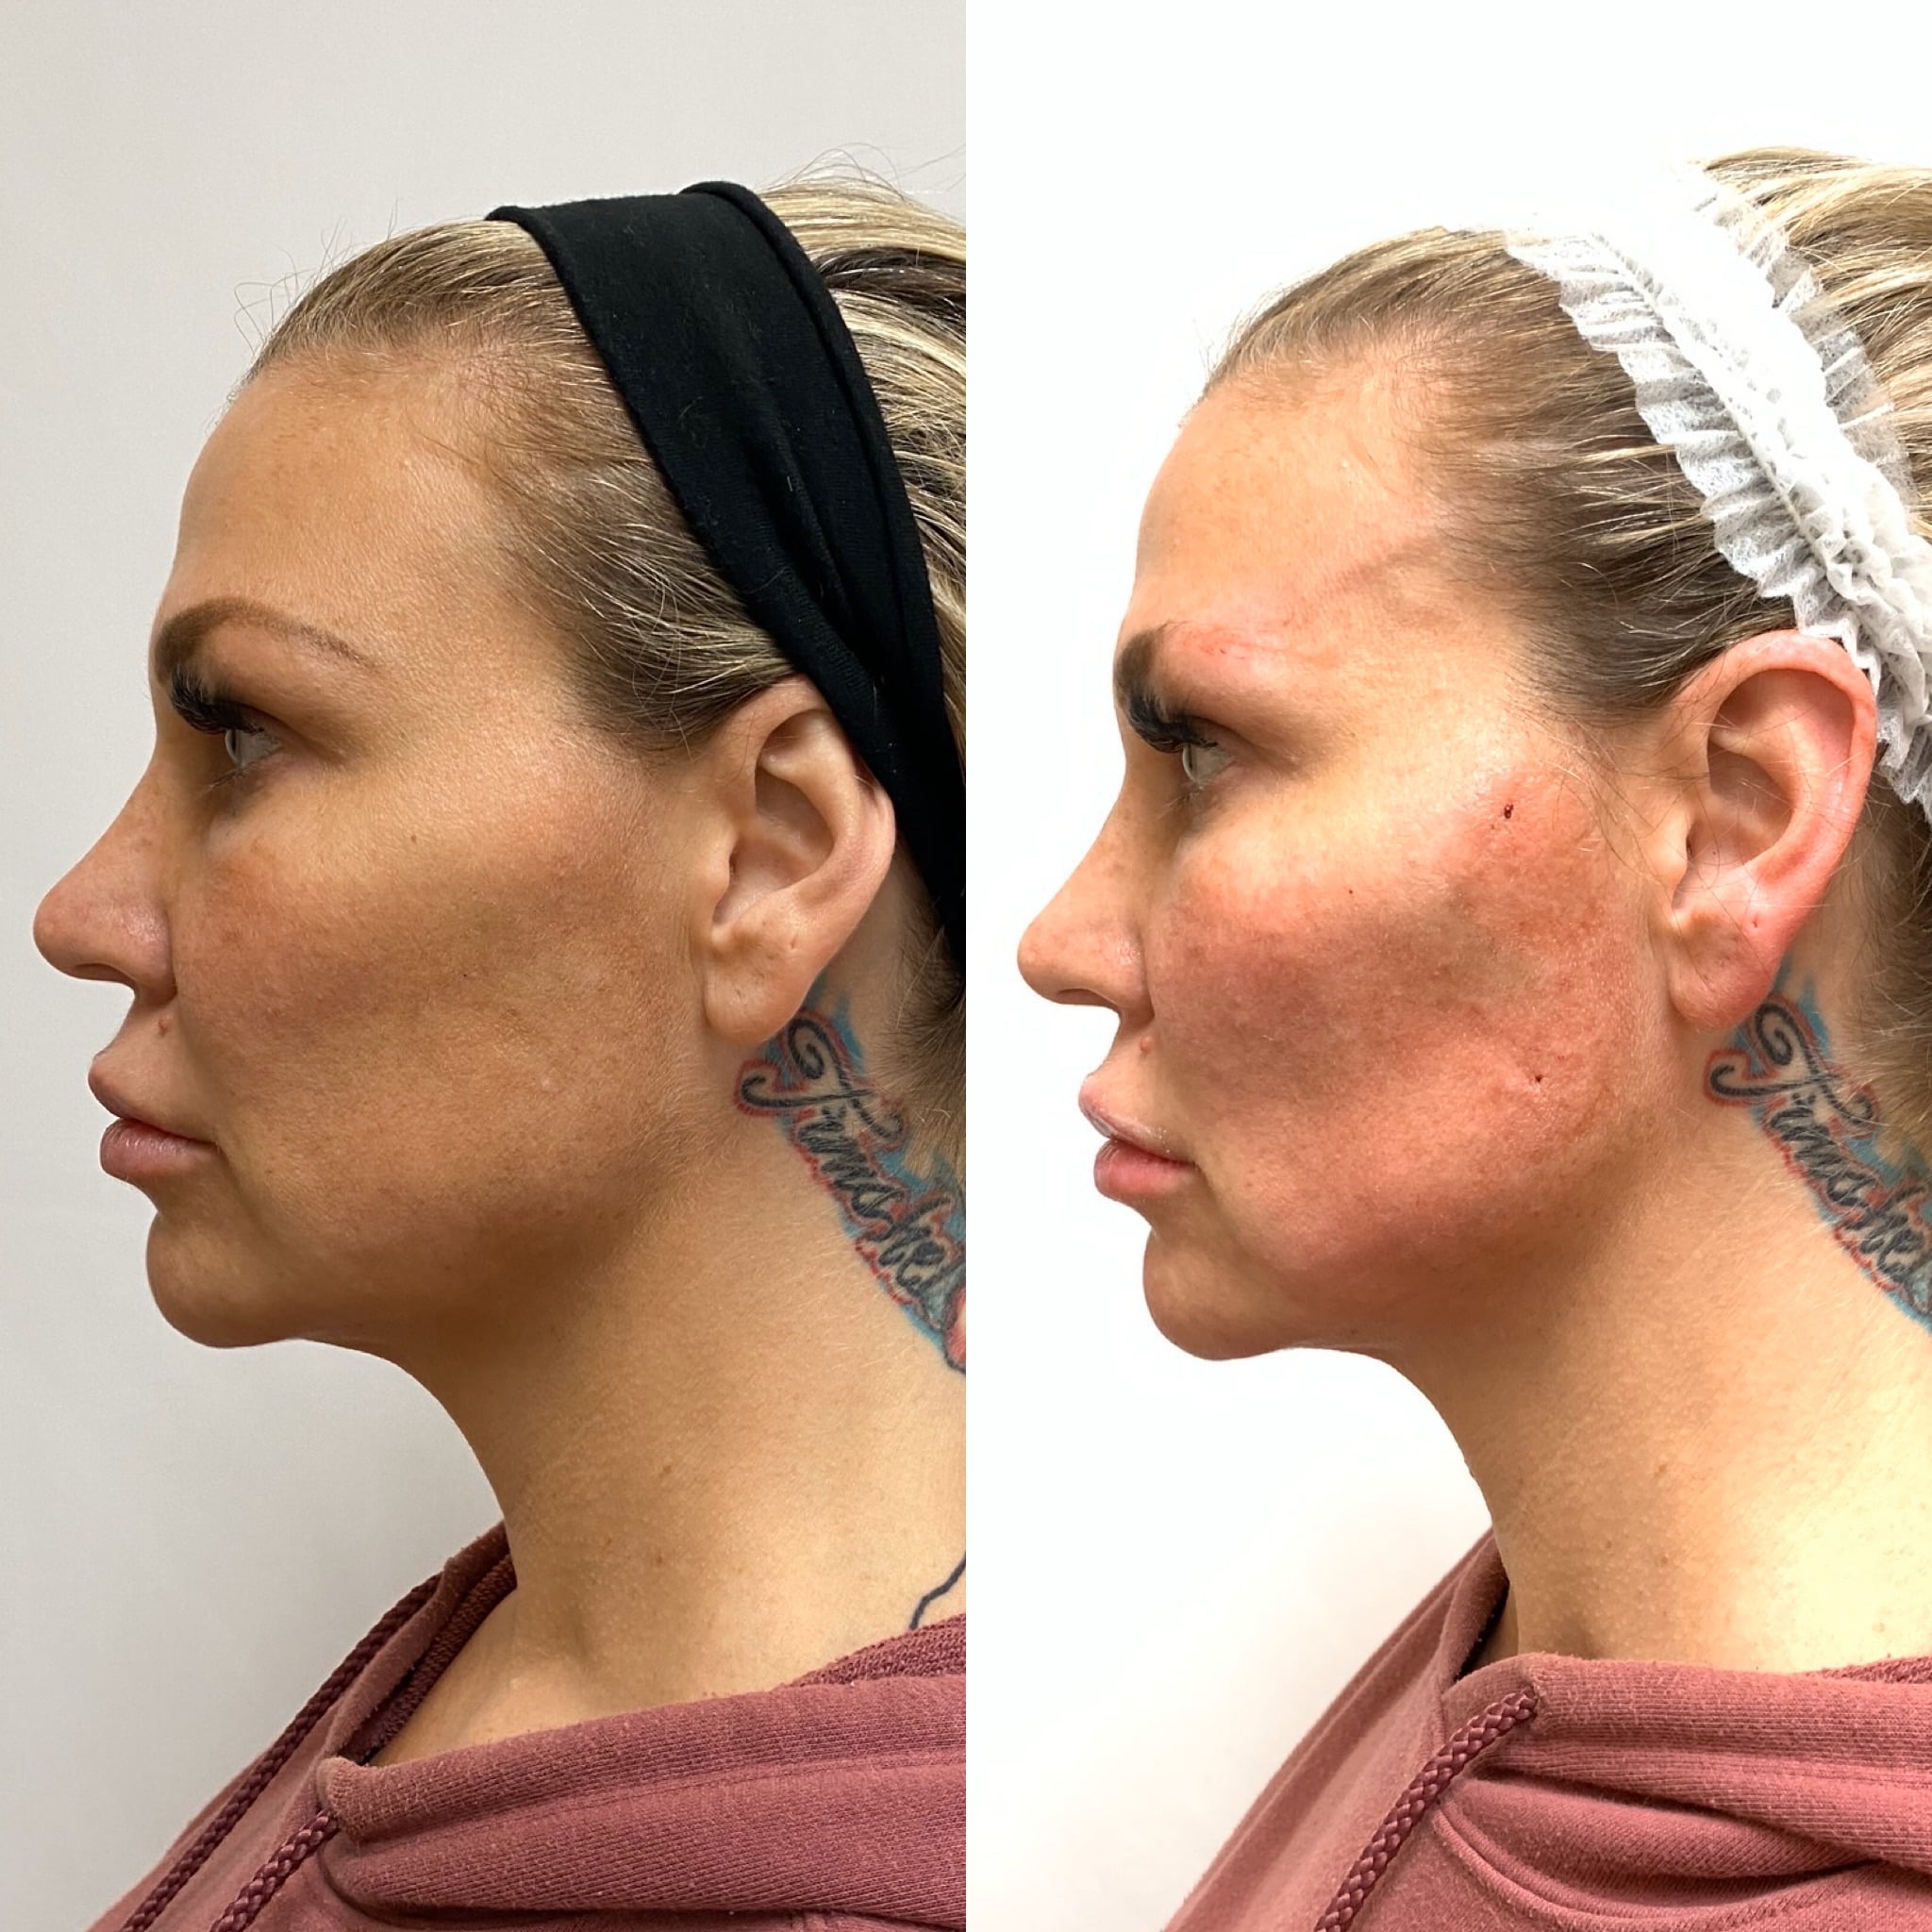 Before and After PDO Threads treatment | Beauty Boost Med Spa at Newport Beach, CA